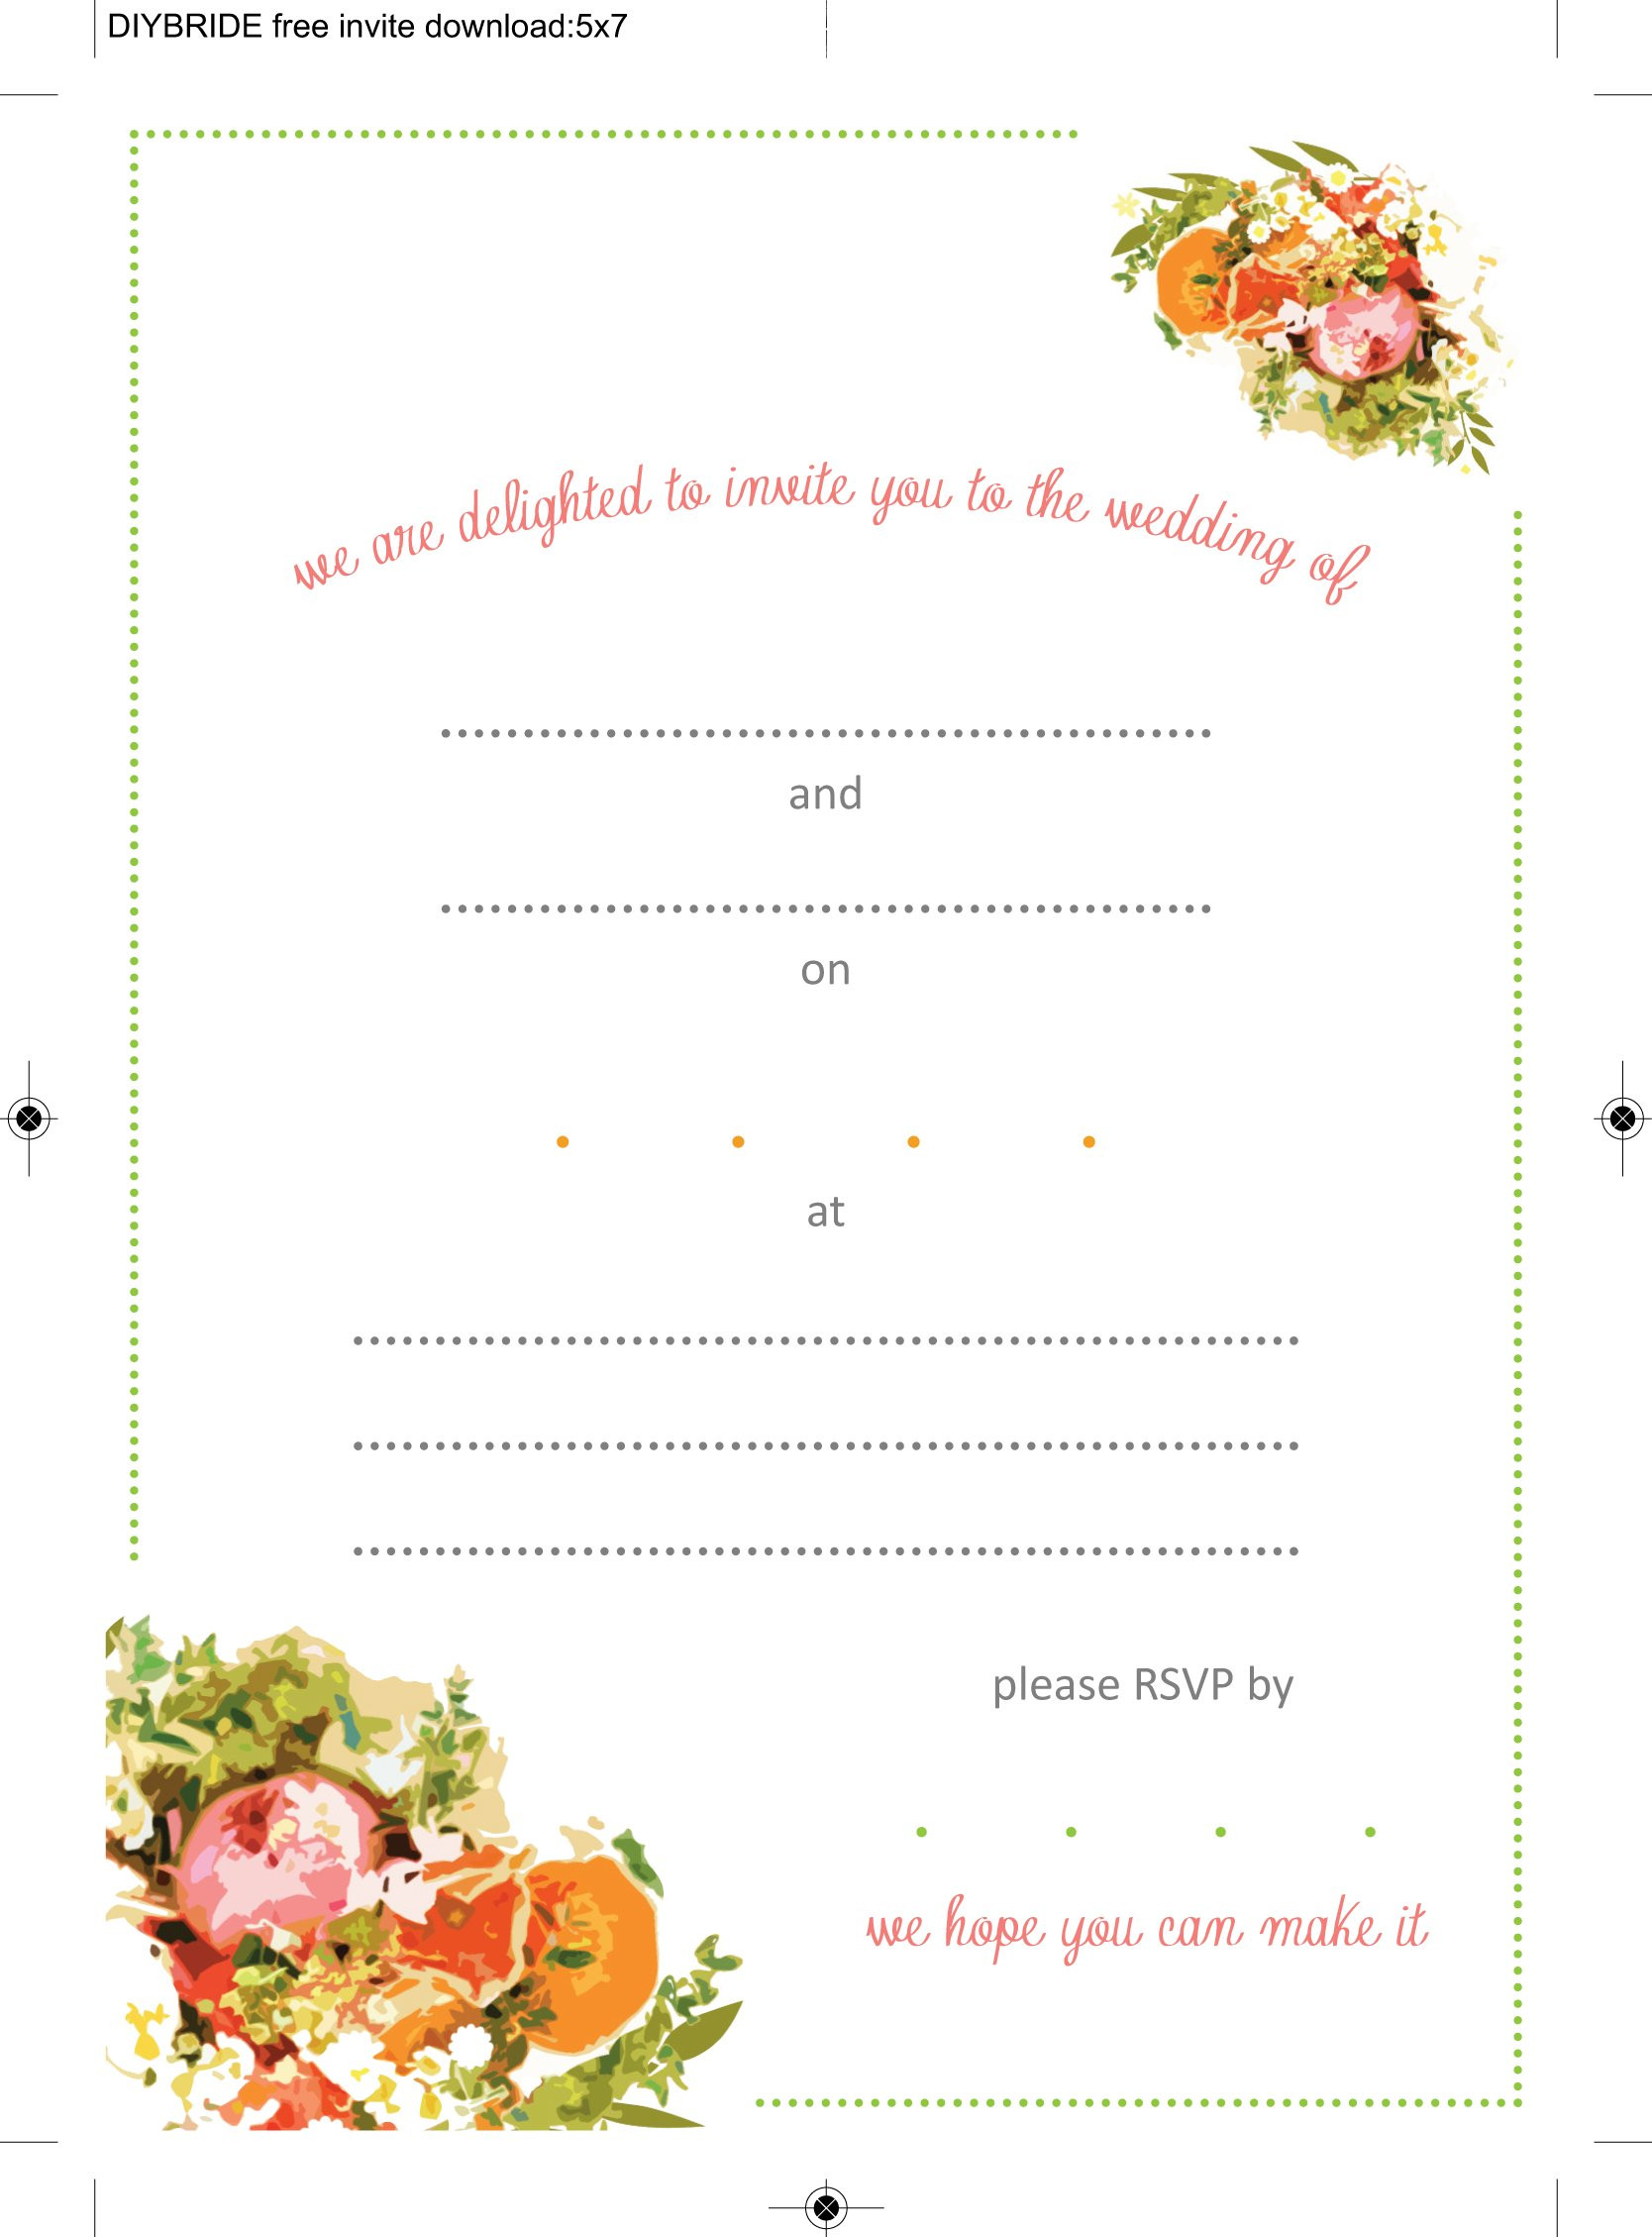 Free Wedding Invite Templates
 Wedding Invitation Templates That Are Cute And Easy to